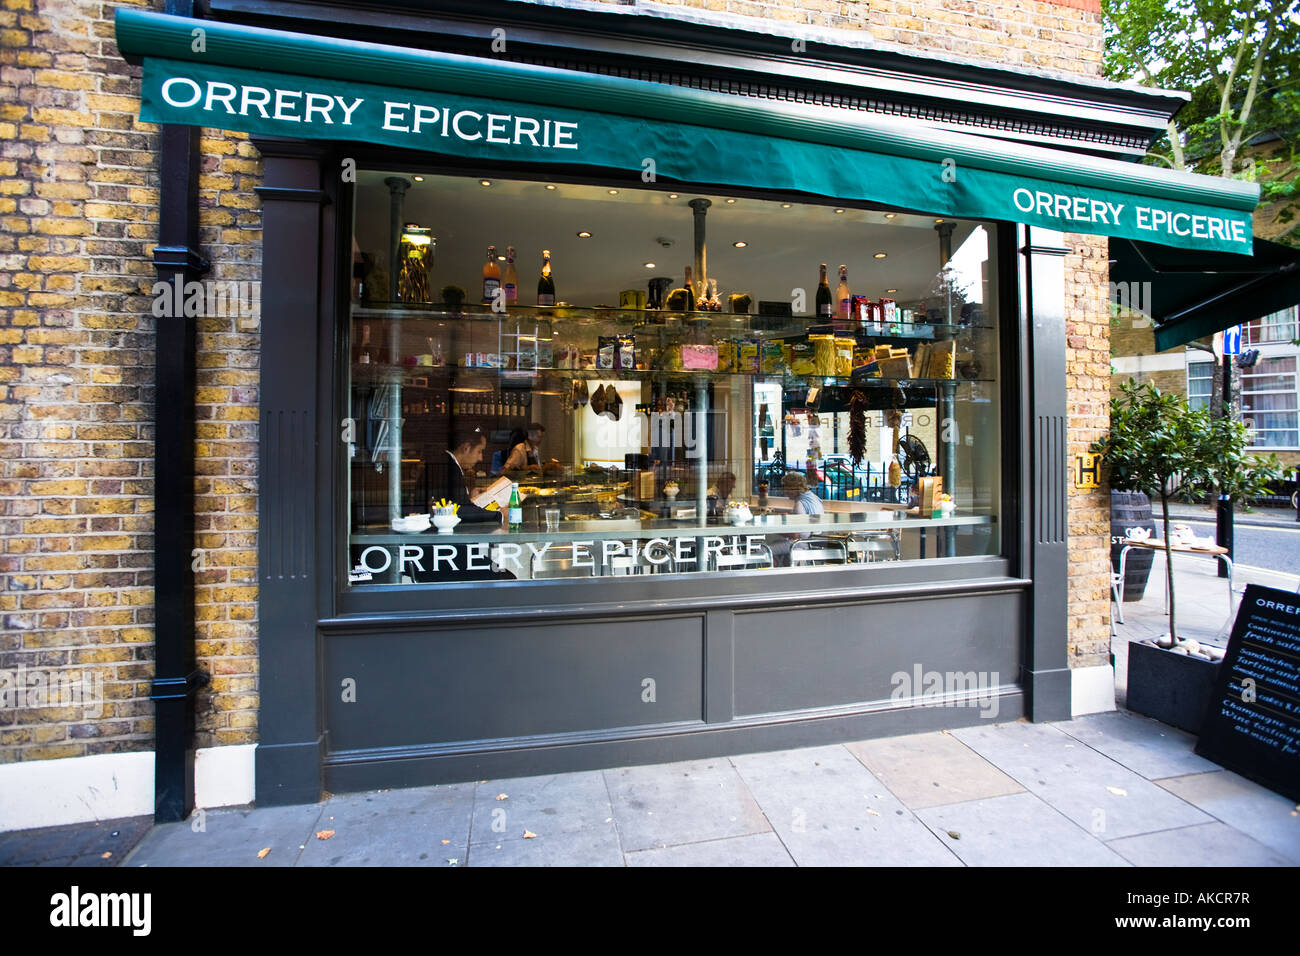 A businessman taking lunch at The Orrery Epicerie: a delicatessen in Marlybone, part of the Conran chain. London, England. Stock Photo